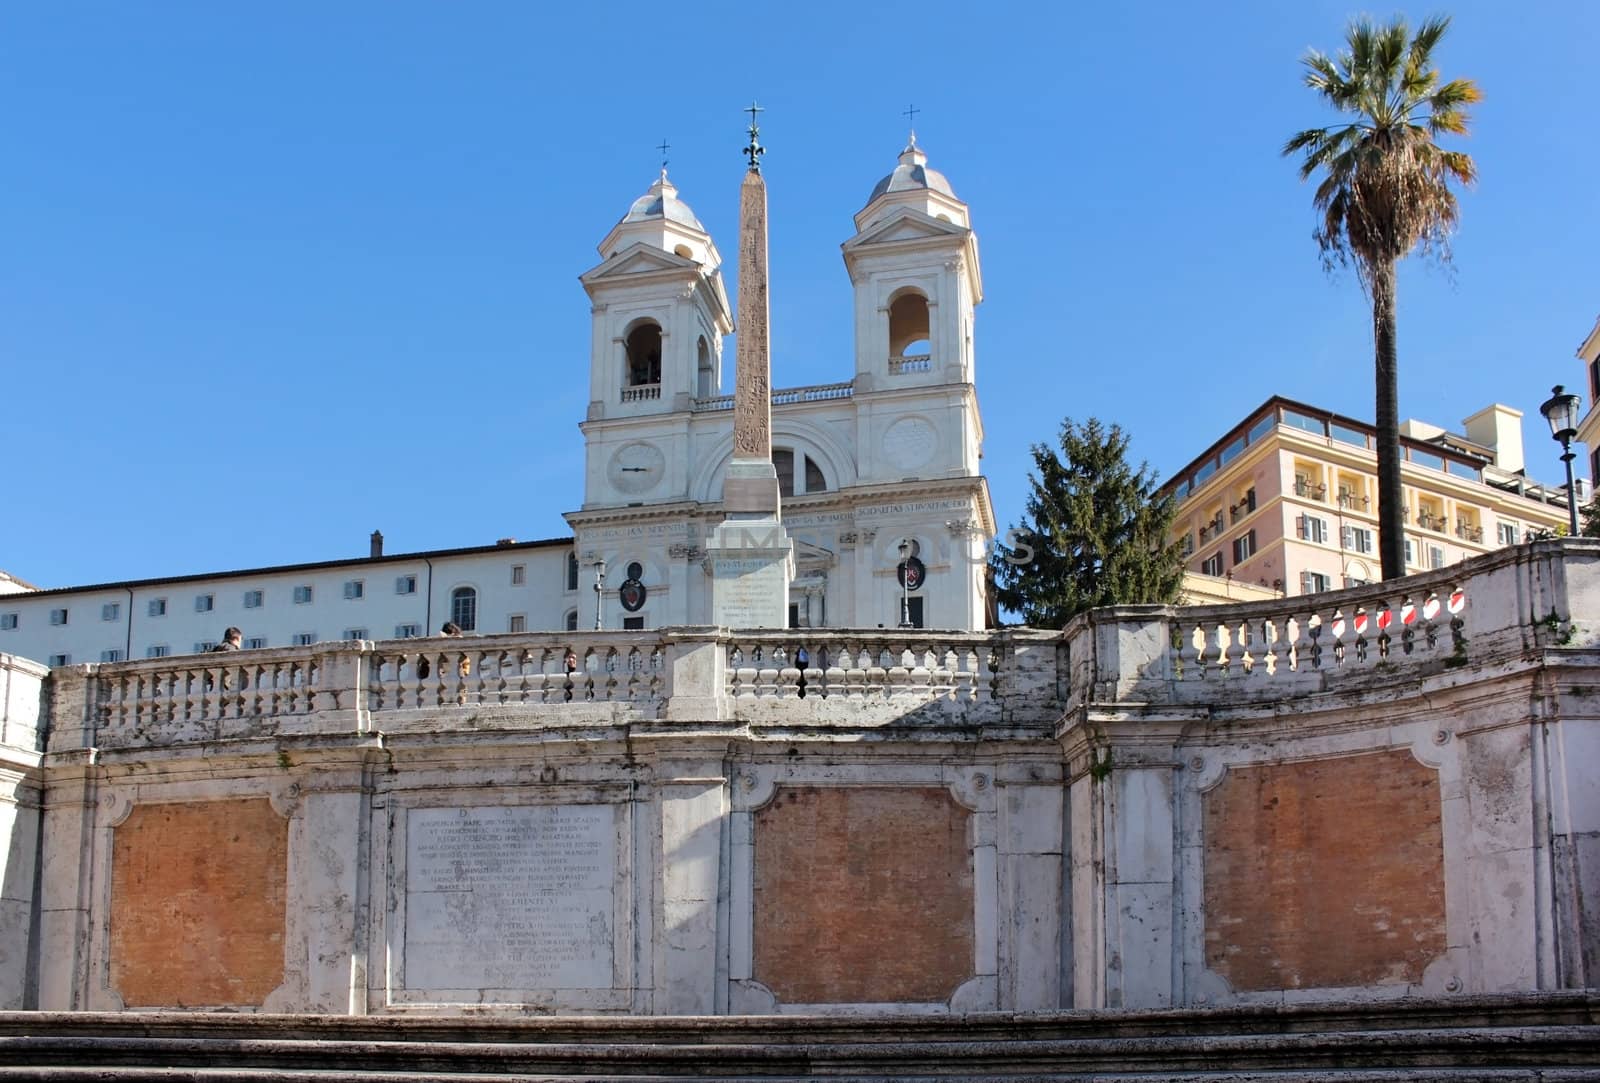 view of the church of Trinita dei Monti and the obelisk in front of her, Rome, Italy